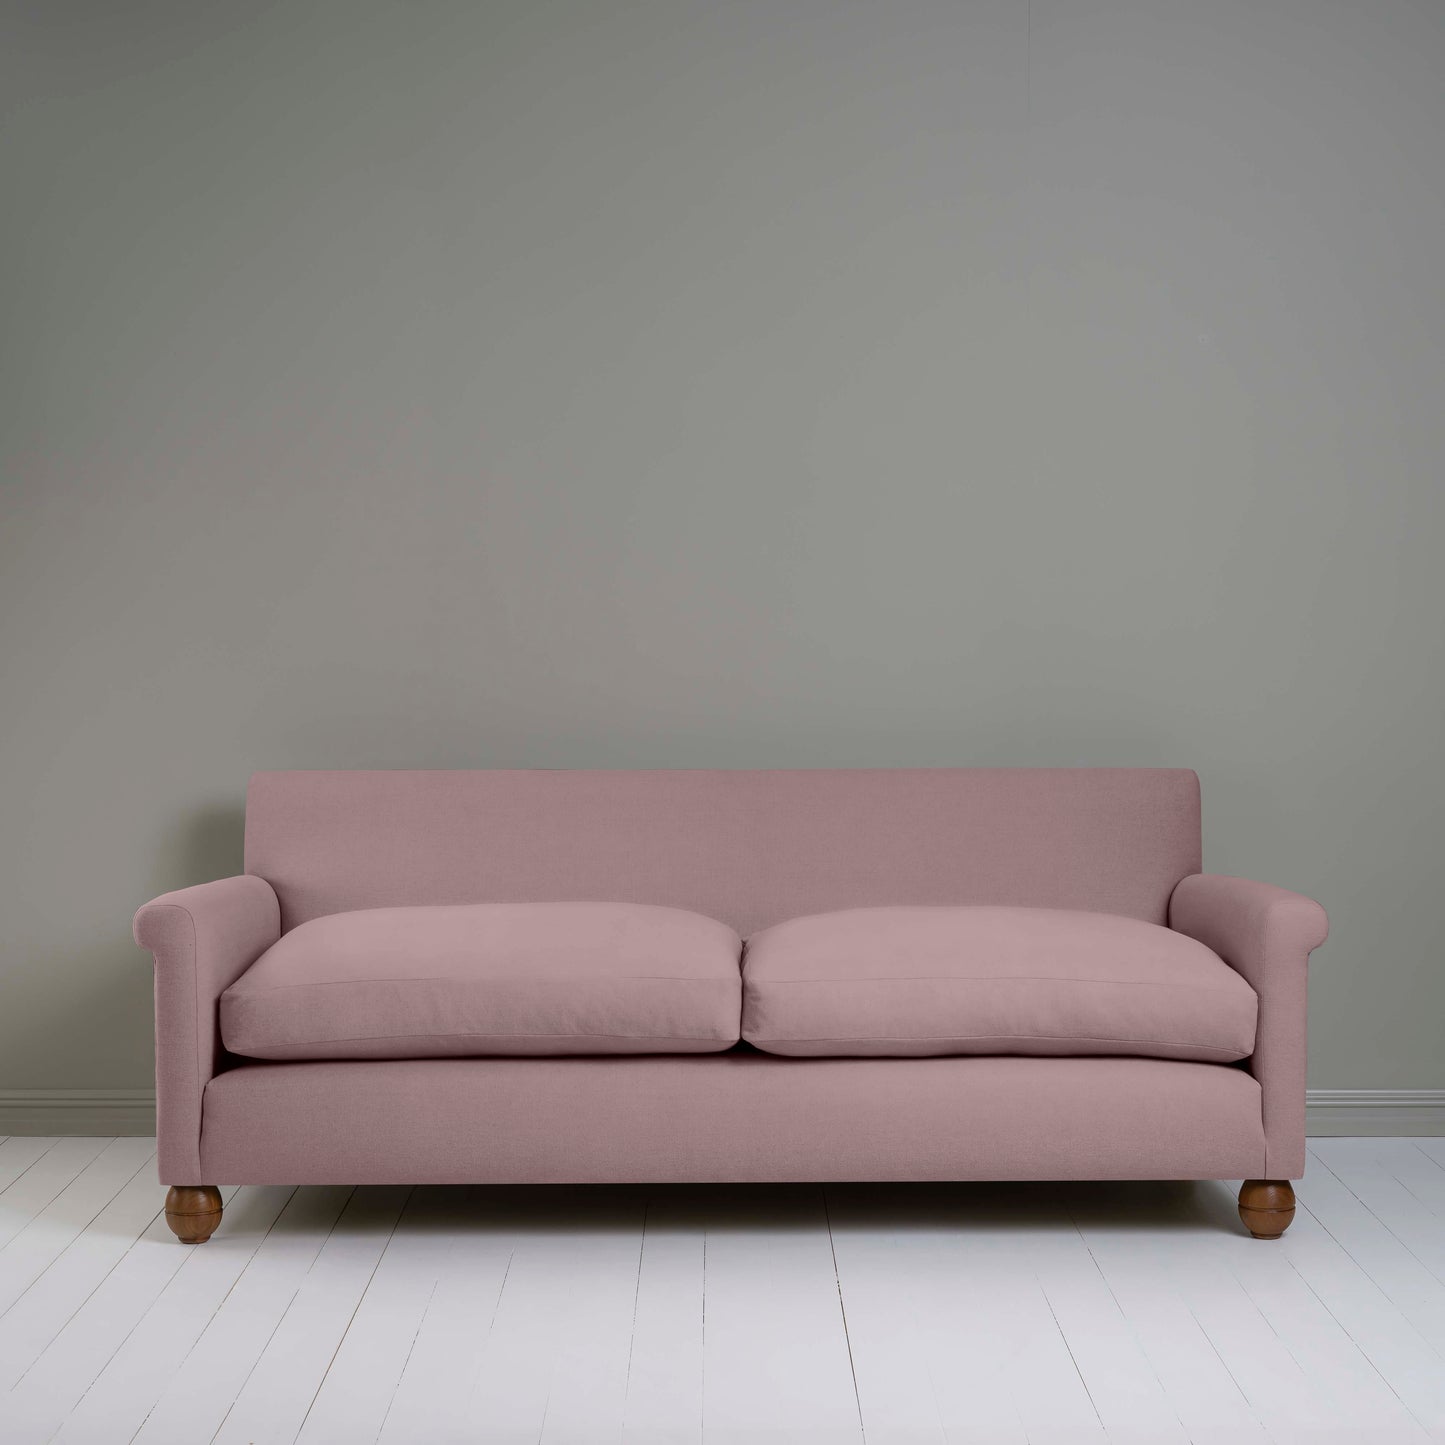 Idler 4 seater sofa in Laidback Linen Heather